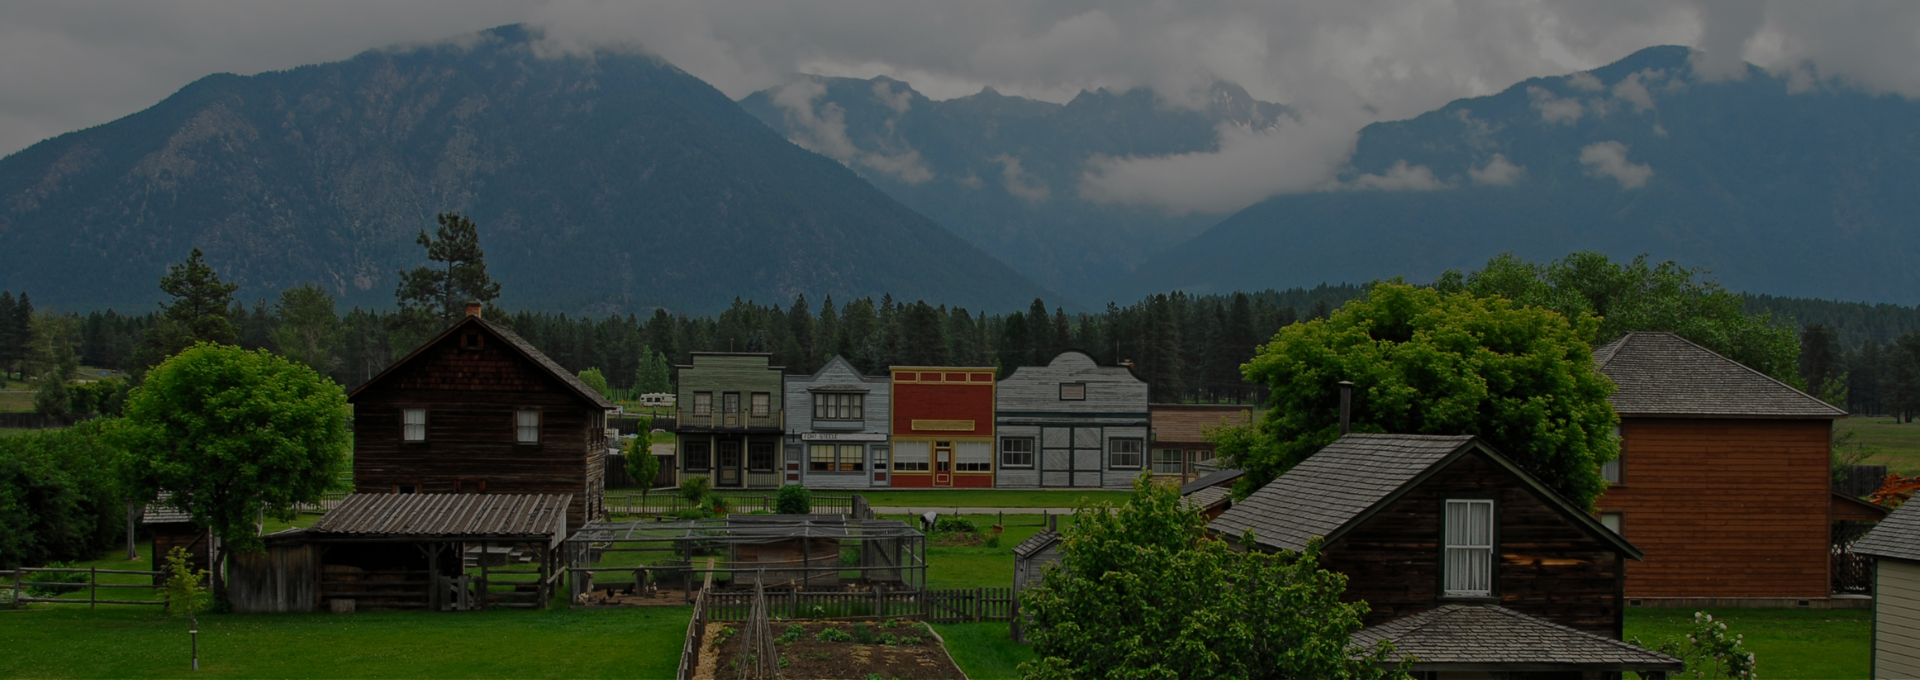 Image of Fort Steele, BC.